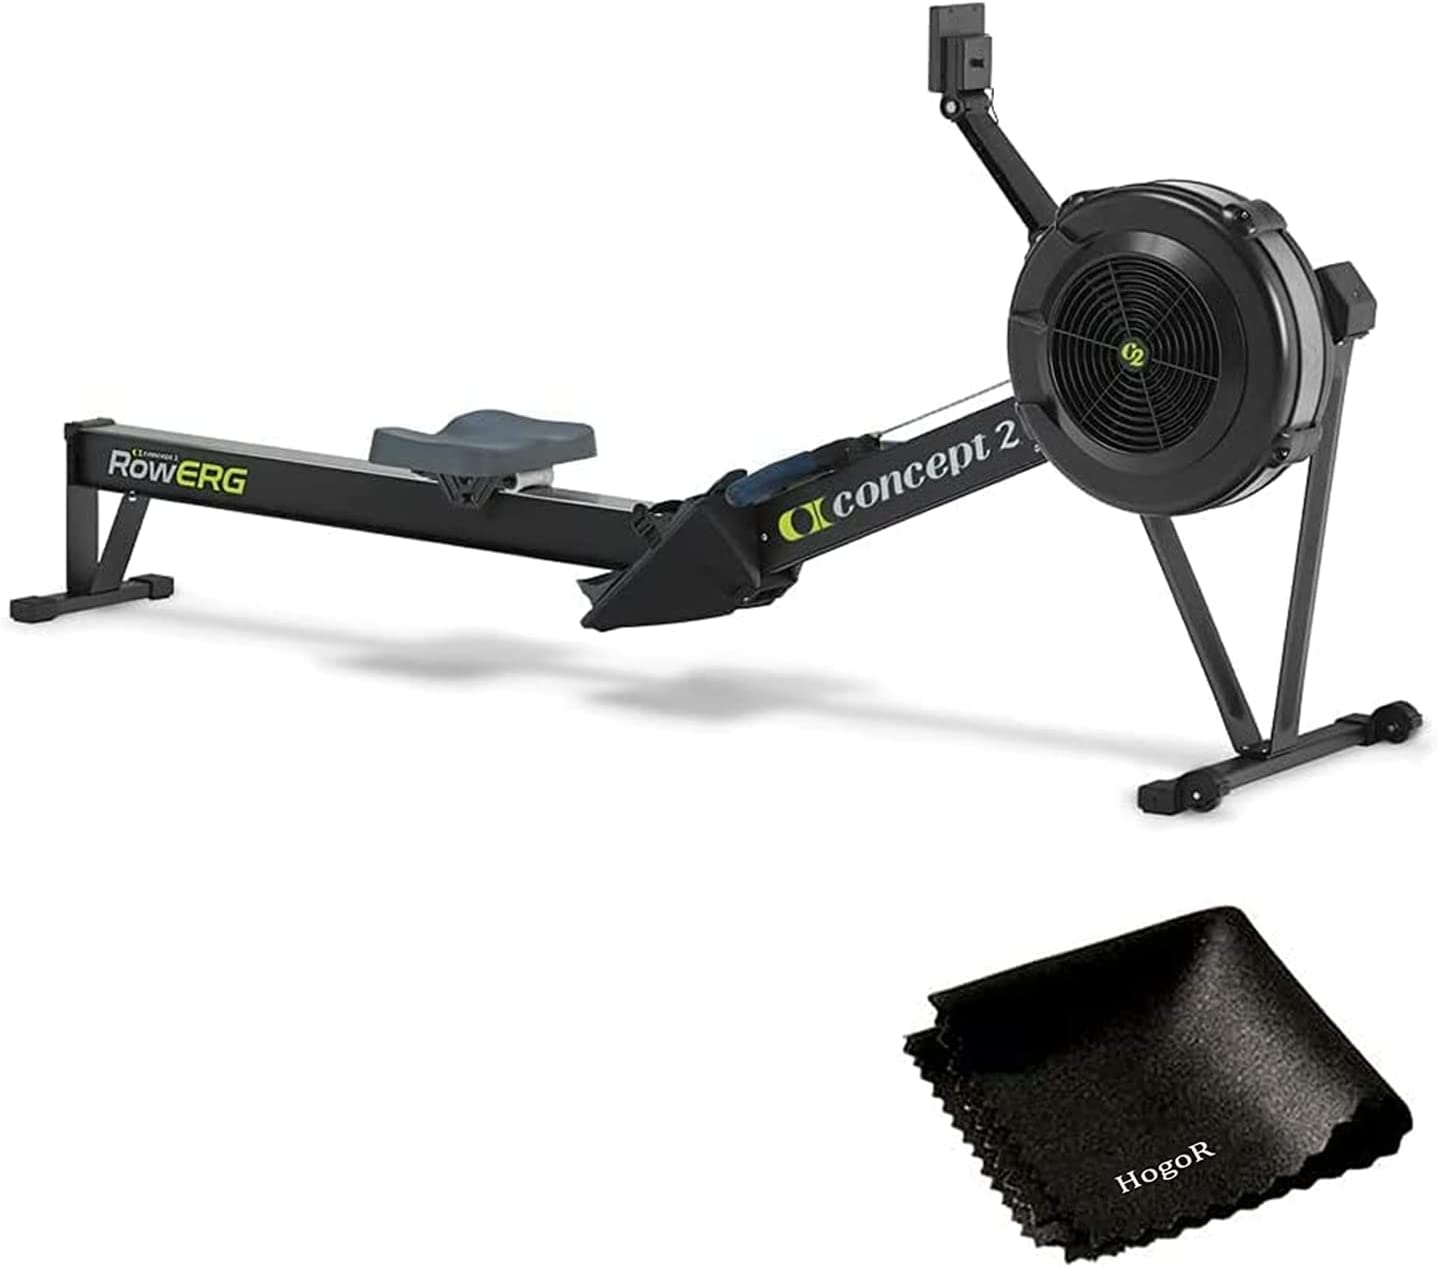 Concept2 Model D Indoor Rowing Machine with PM5 Performance Monitor, foldable rowing machines